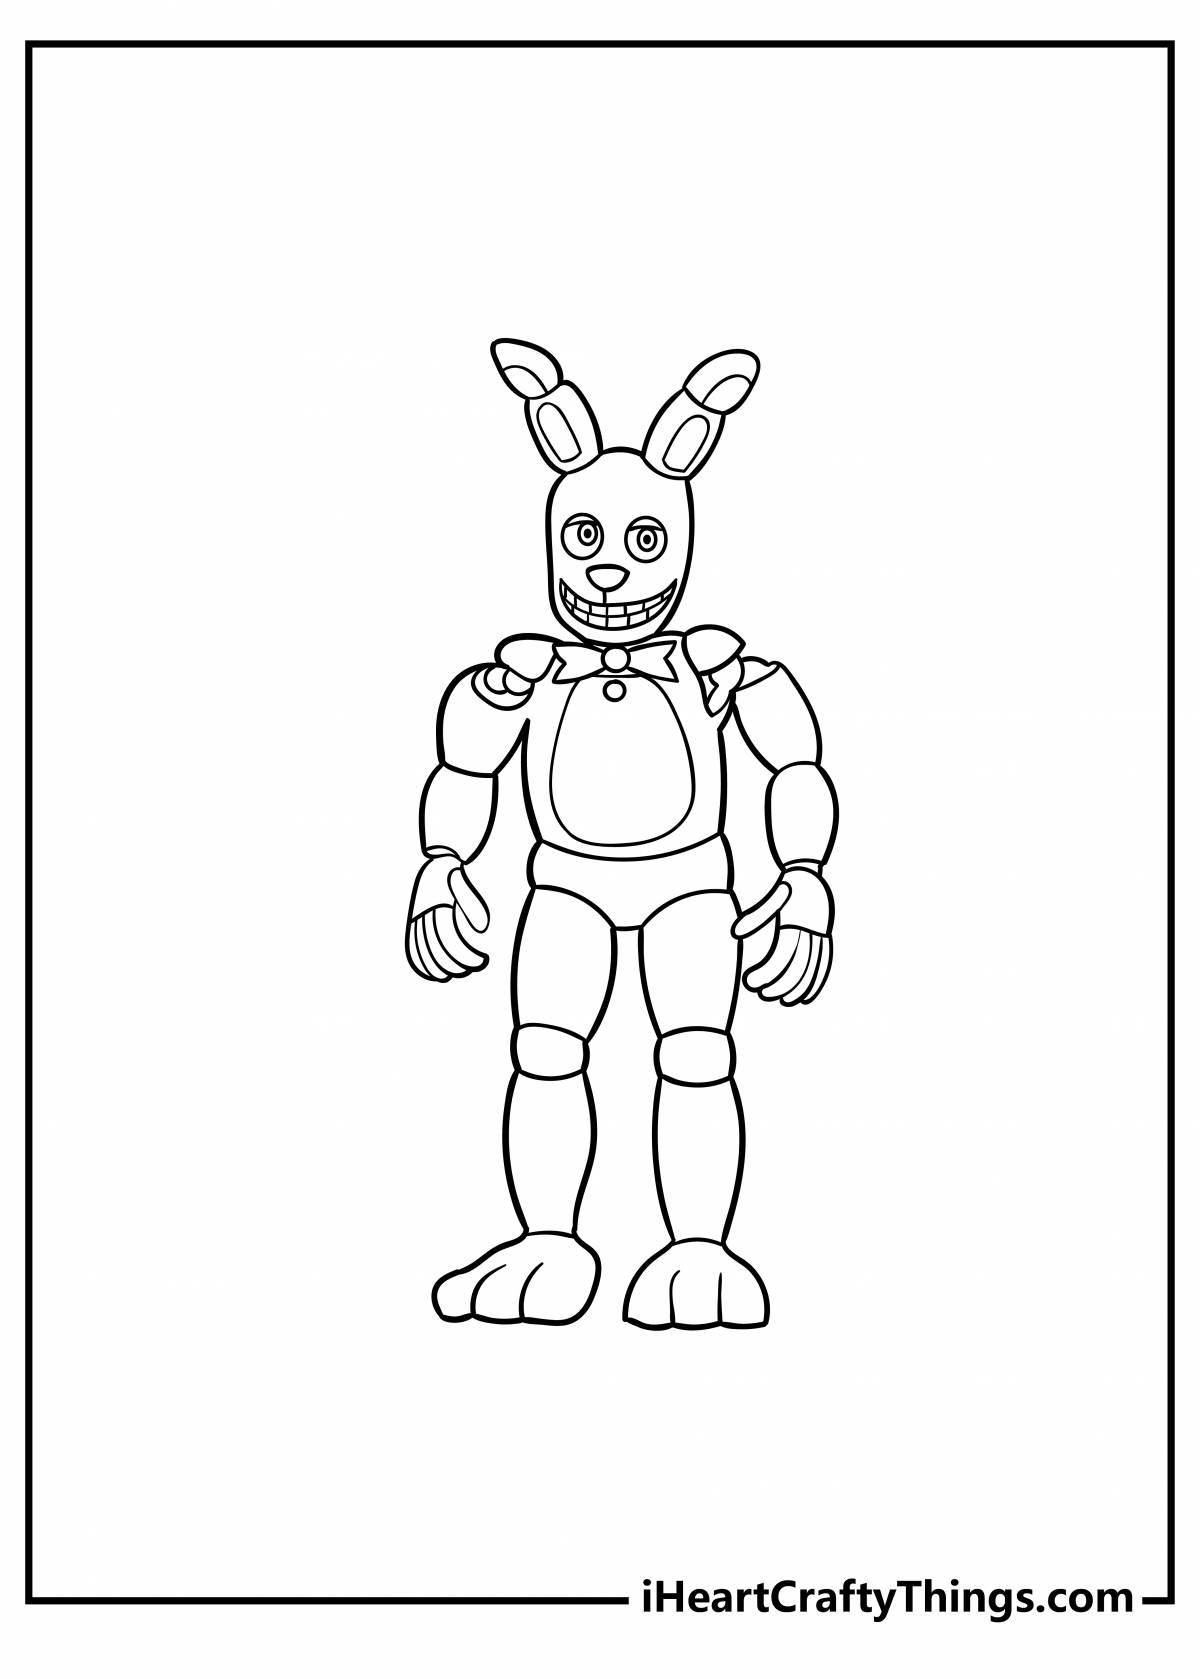 Exquisite fnaf 2 puppet coloring